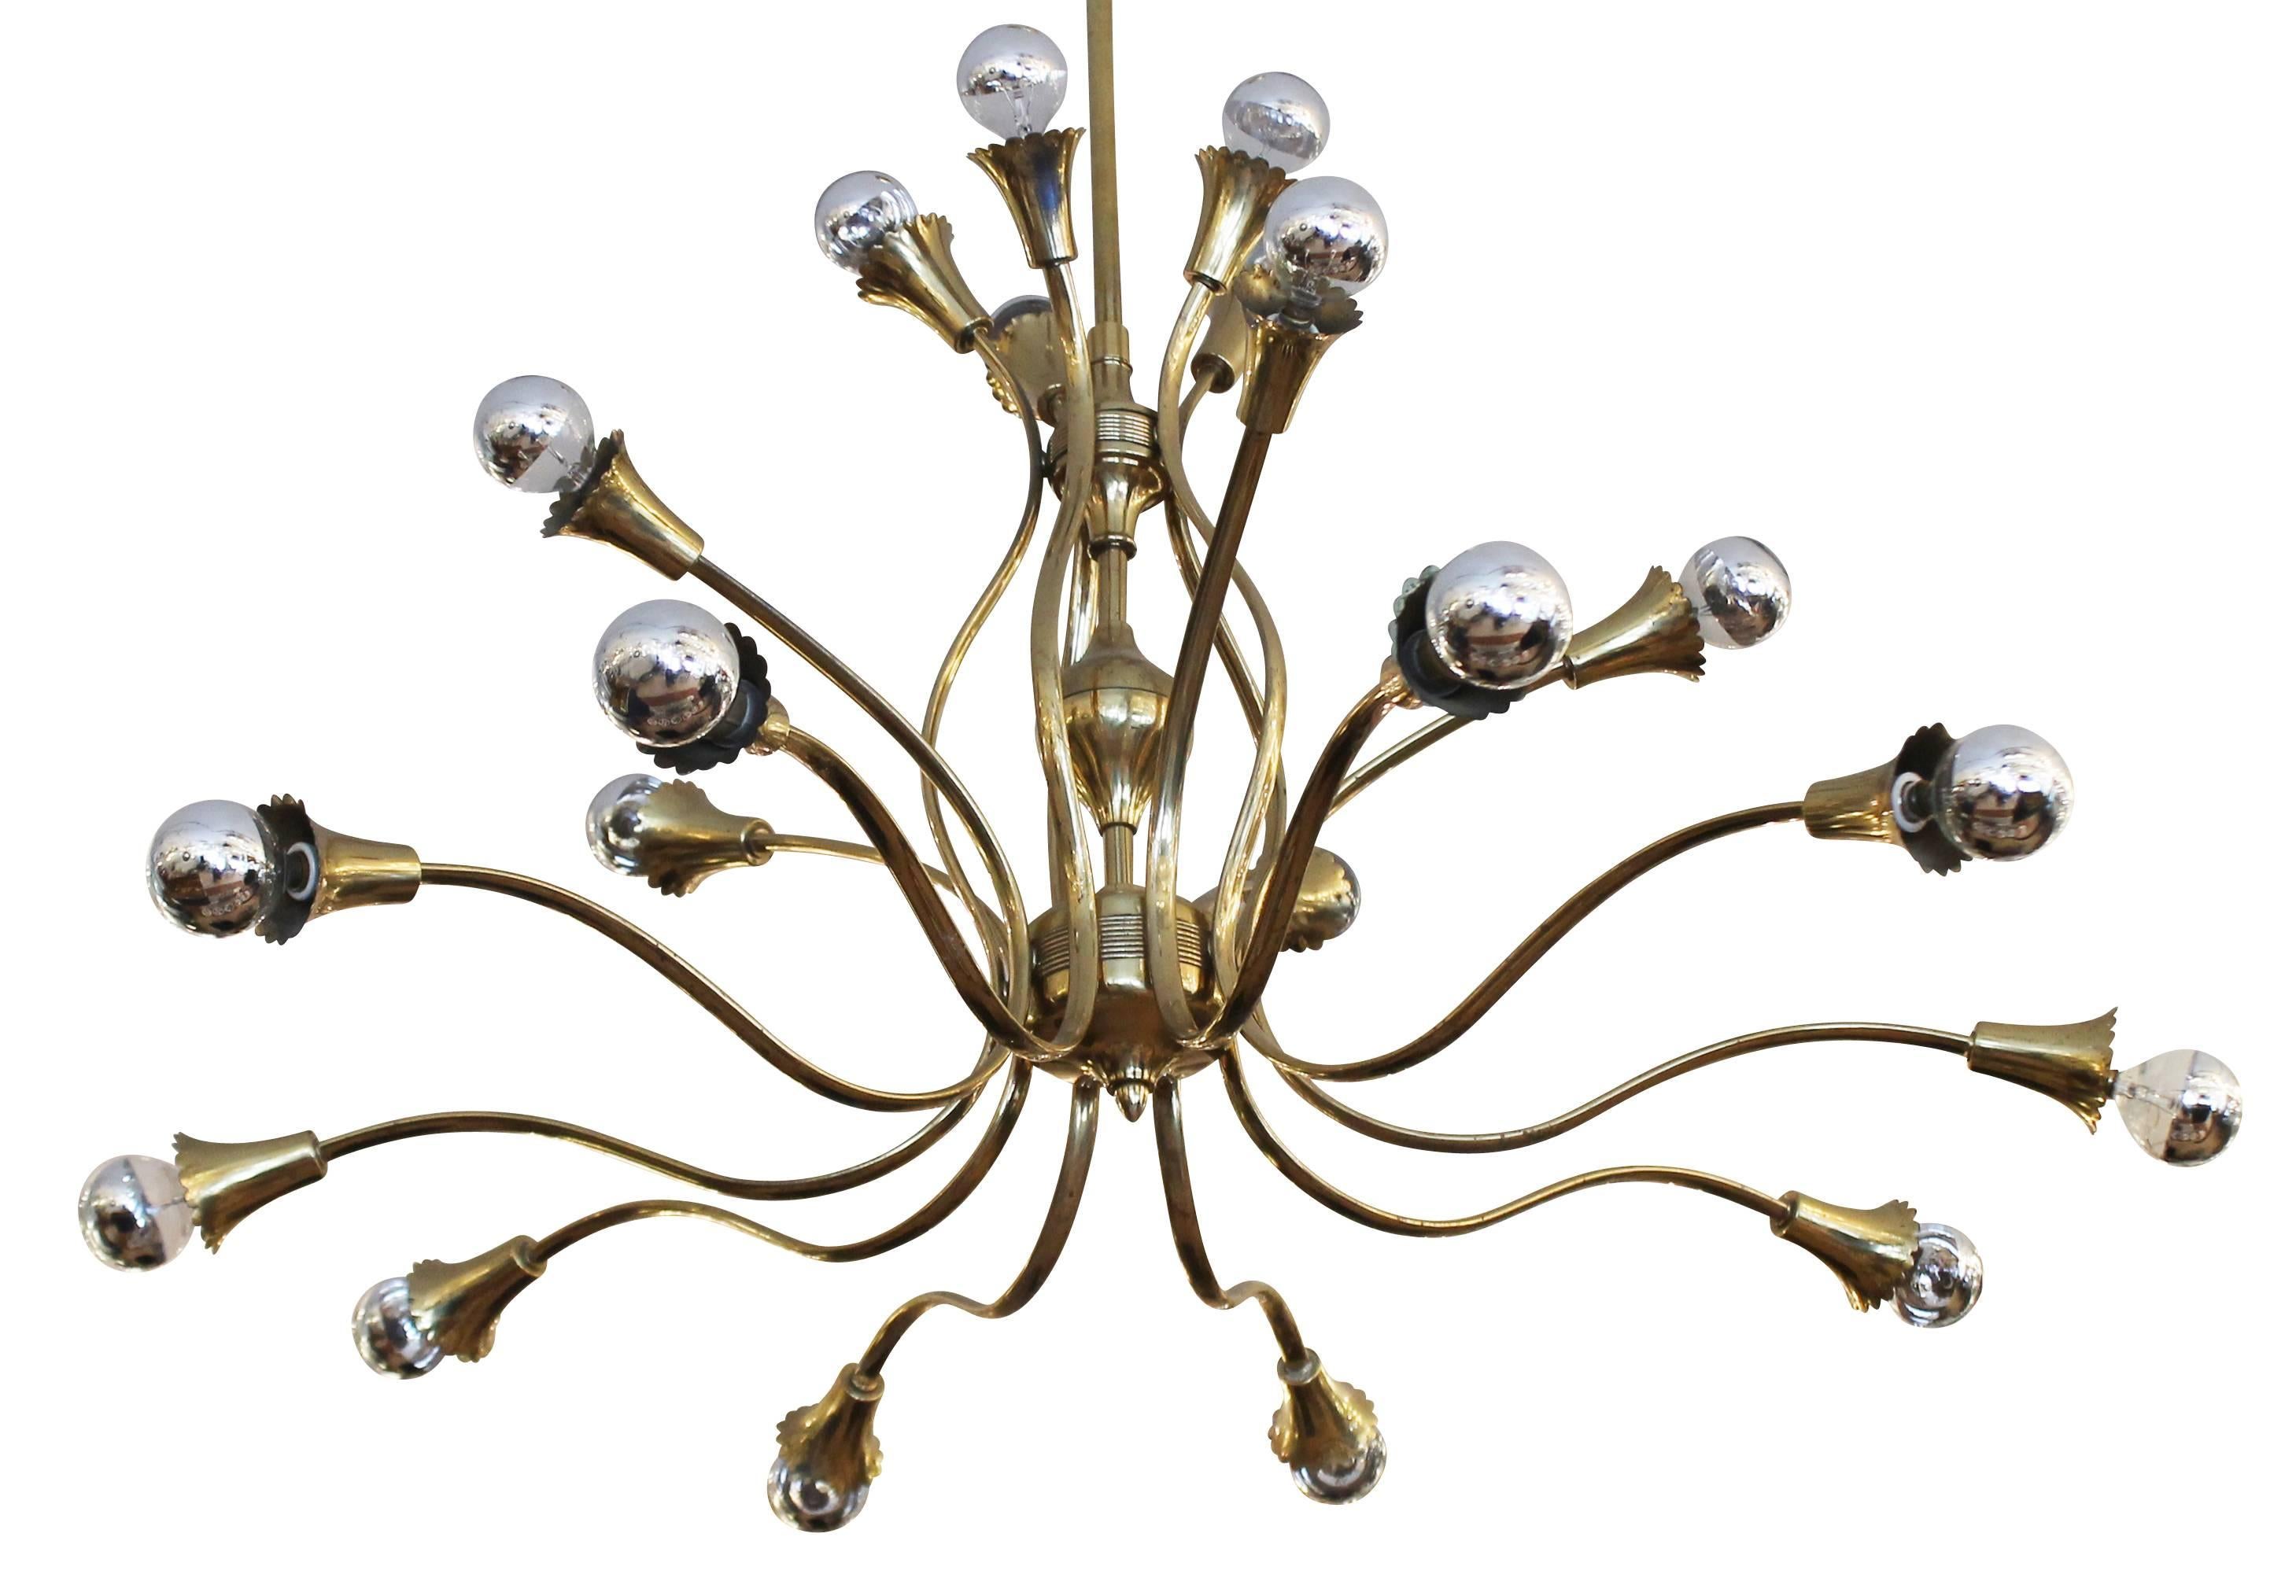 Elegant brass chandelier with a floral motif. Holds 20 candelabra sockets. Height of stem can be adjusted upon request.